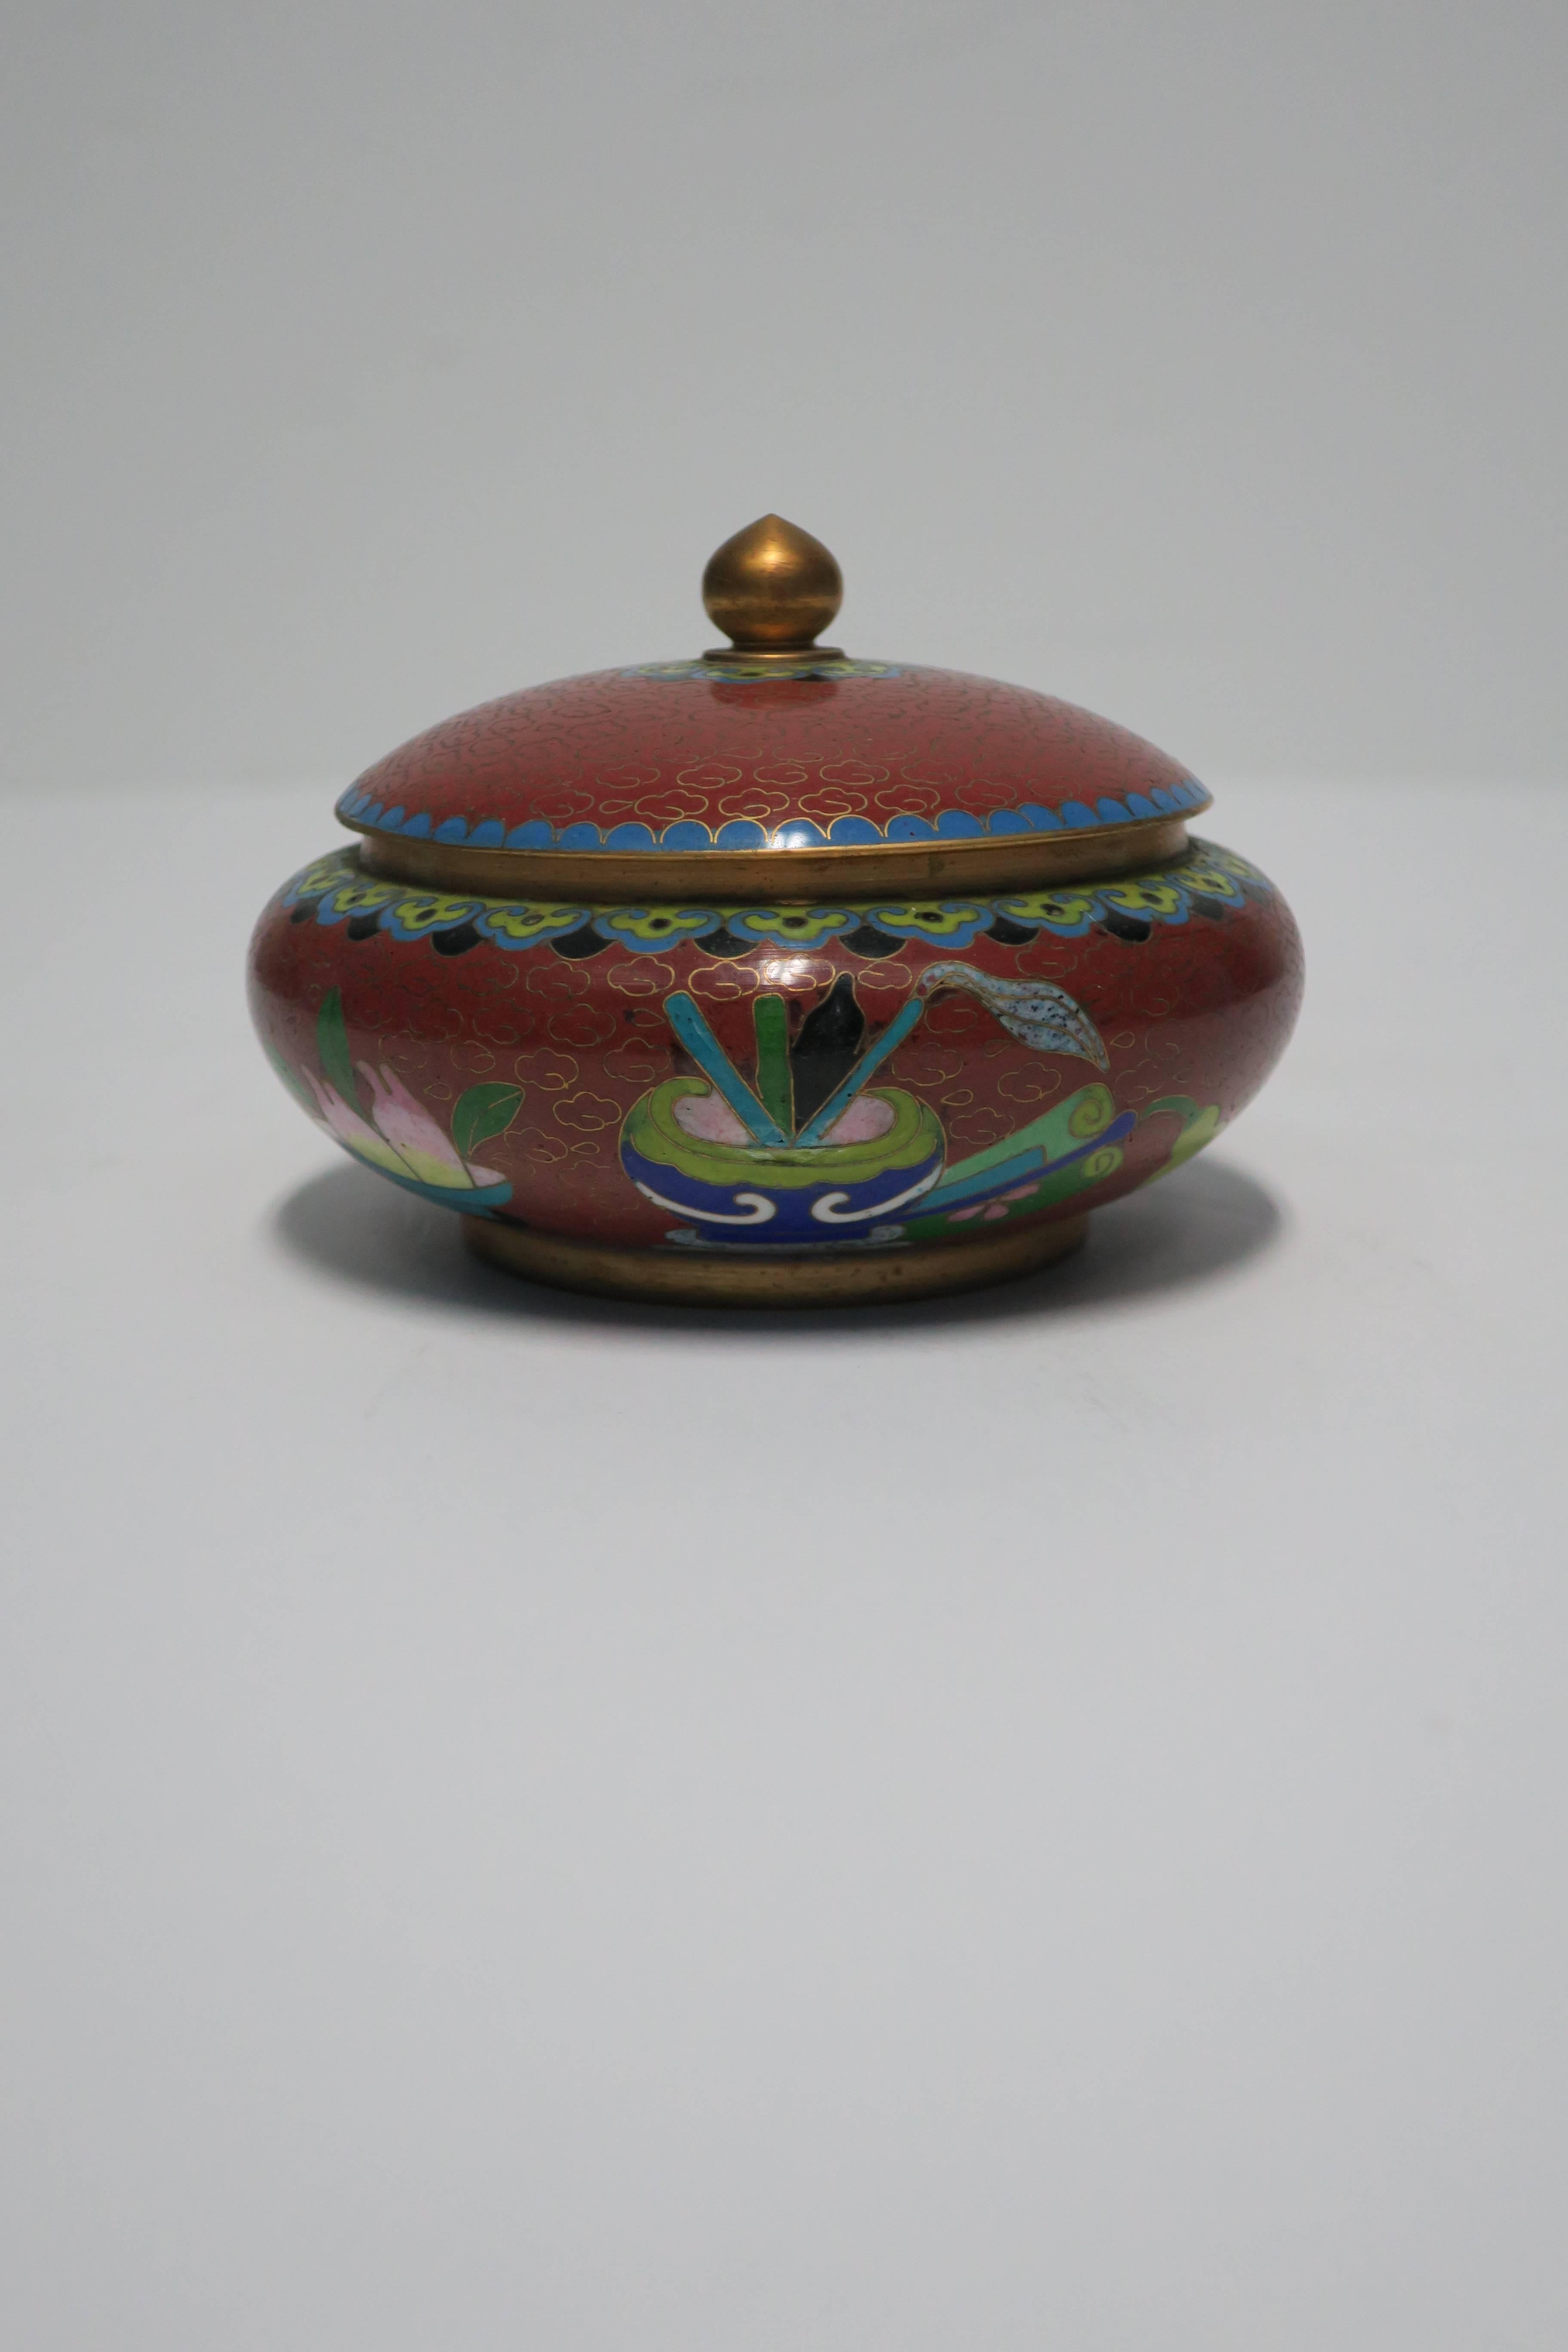 A beautiful vintage Chinese cloisonné round box with brass finial top, with an exterior depicting a humming bird and blossoms. Predominant color is a dark red, burgundy, or ox blood hue, with blue, black, green, pink, and cream accent enamel